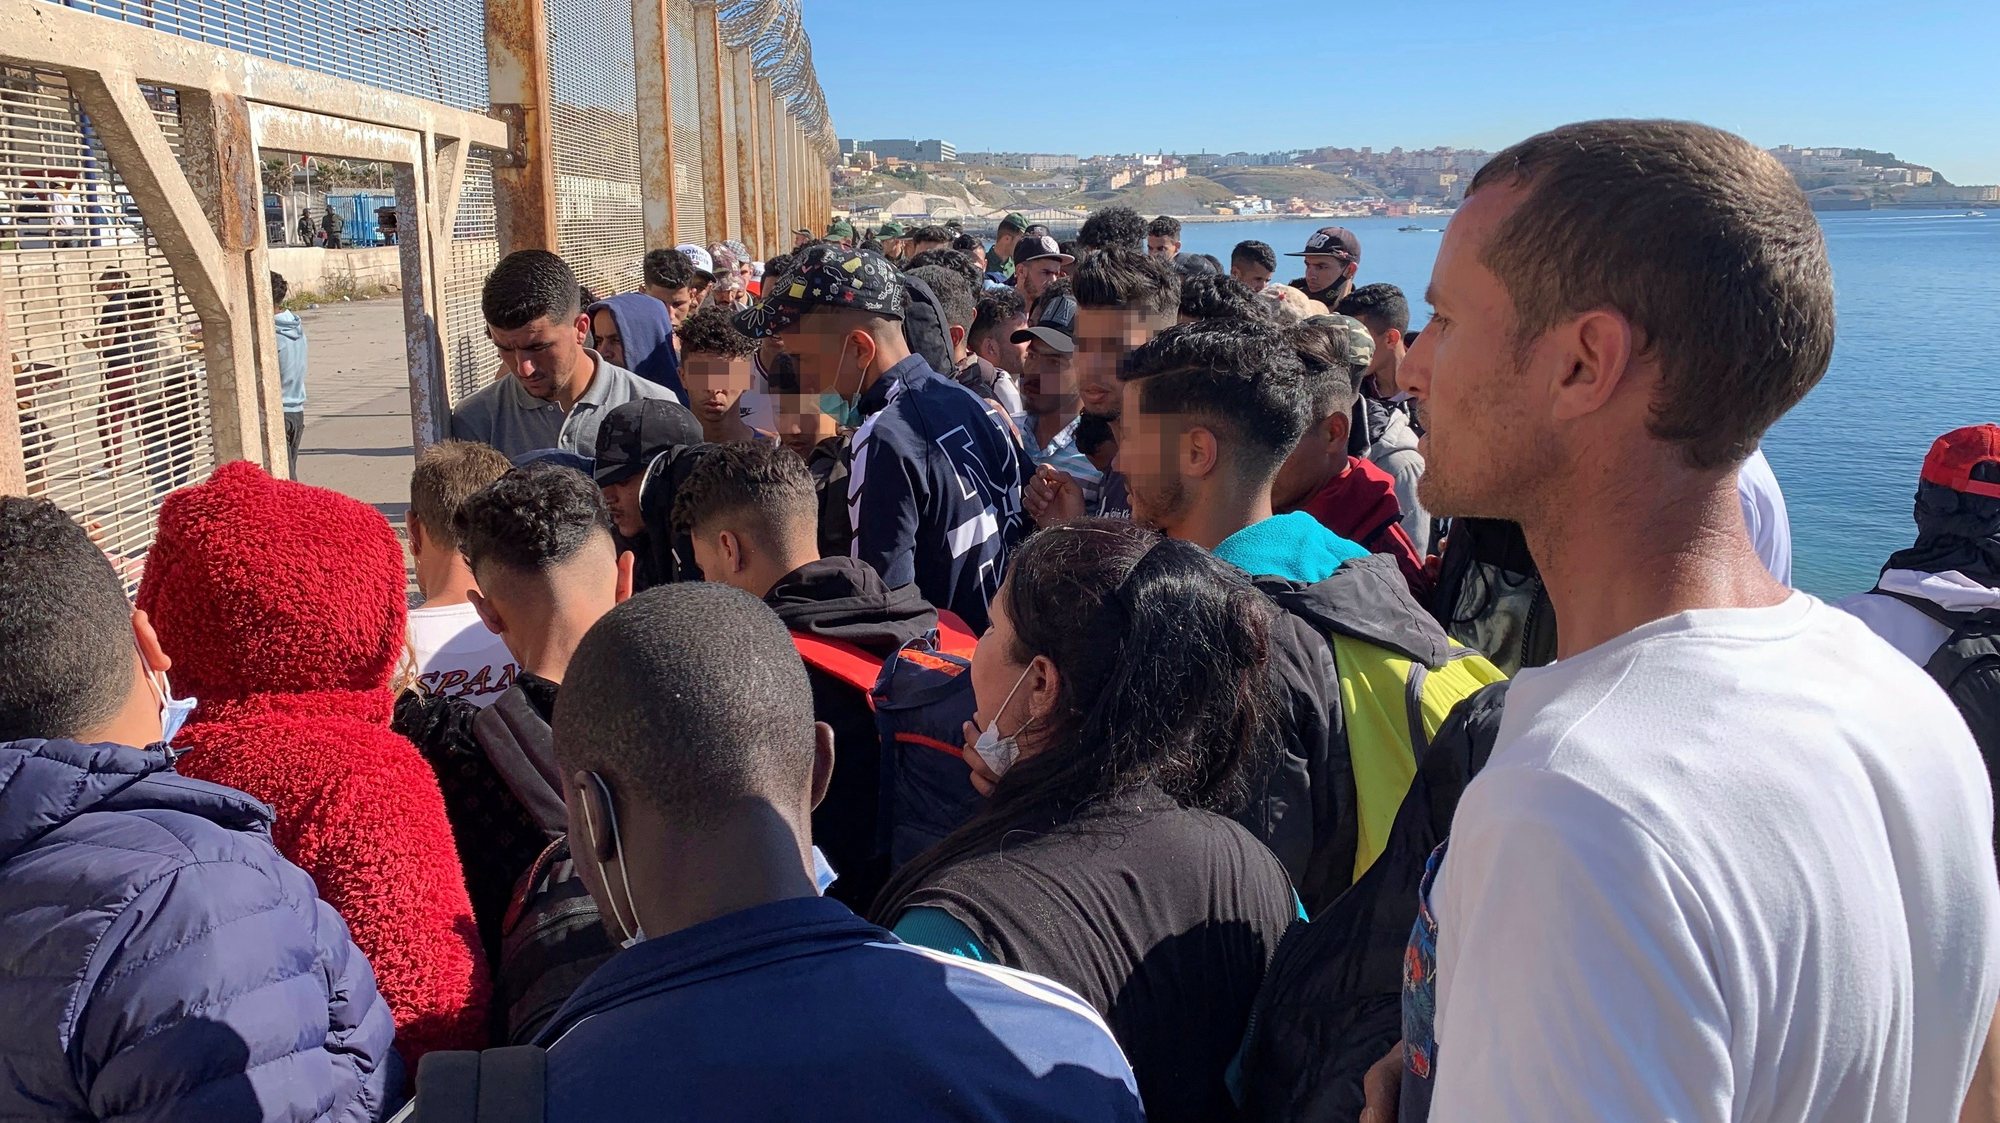 epa09211167 A group of people try to cross the border fence separating Fnideq (Castillejos, Morocco) and the Spanish city of Ceuta, located in northern Africa, 19 May 2021, following the arrival of up to 8,000 migrants to Ceuta and the Spanish city of Melilla (also in northern Africa) in the last two days. Spain&#039;s Government considers that the massive arrival of some 8,000 irregular migrants to Ceuta from Morocco since 18 May is an assault on the border caused by the lack of control of the border by Morocco&#039;s Governmet and not a migratory crisis.  EPA/Mohamed Siali